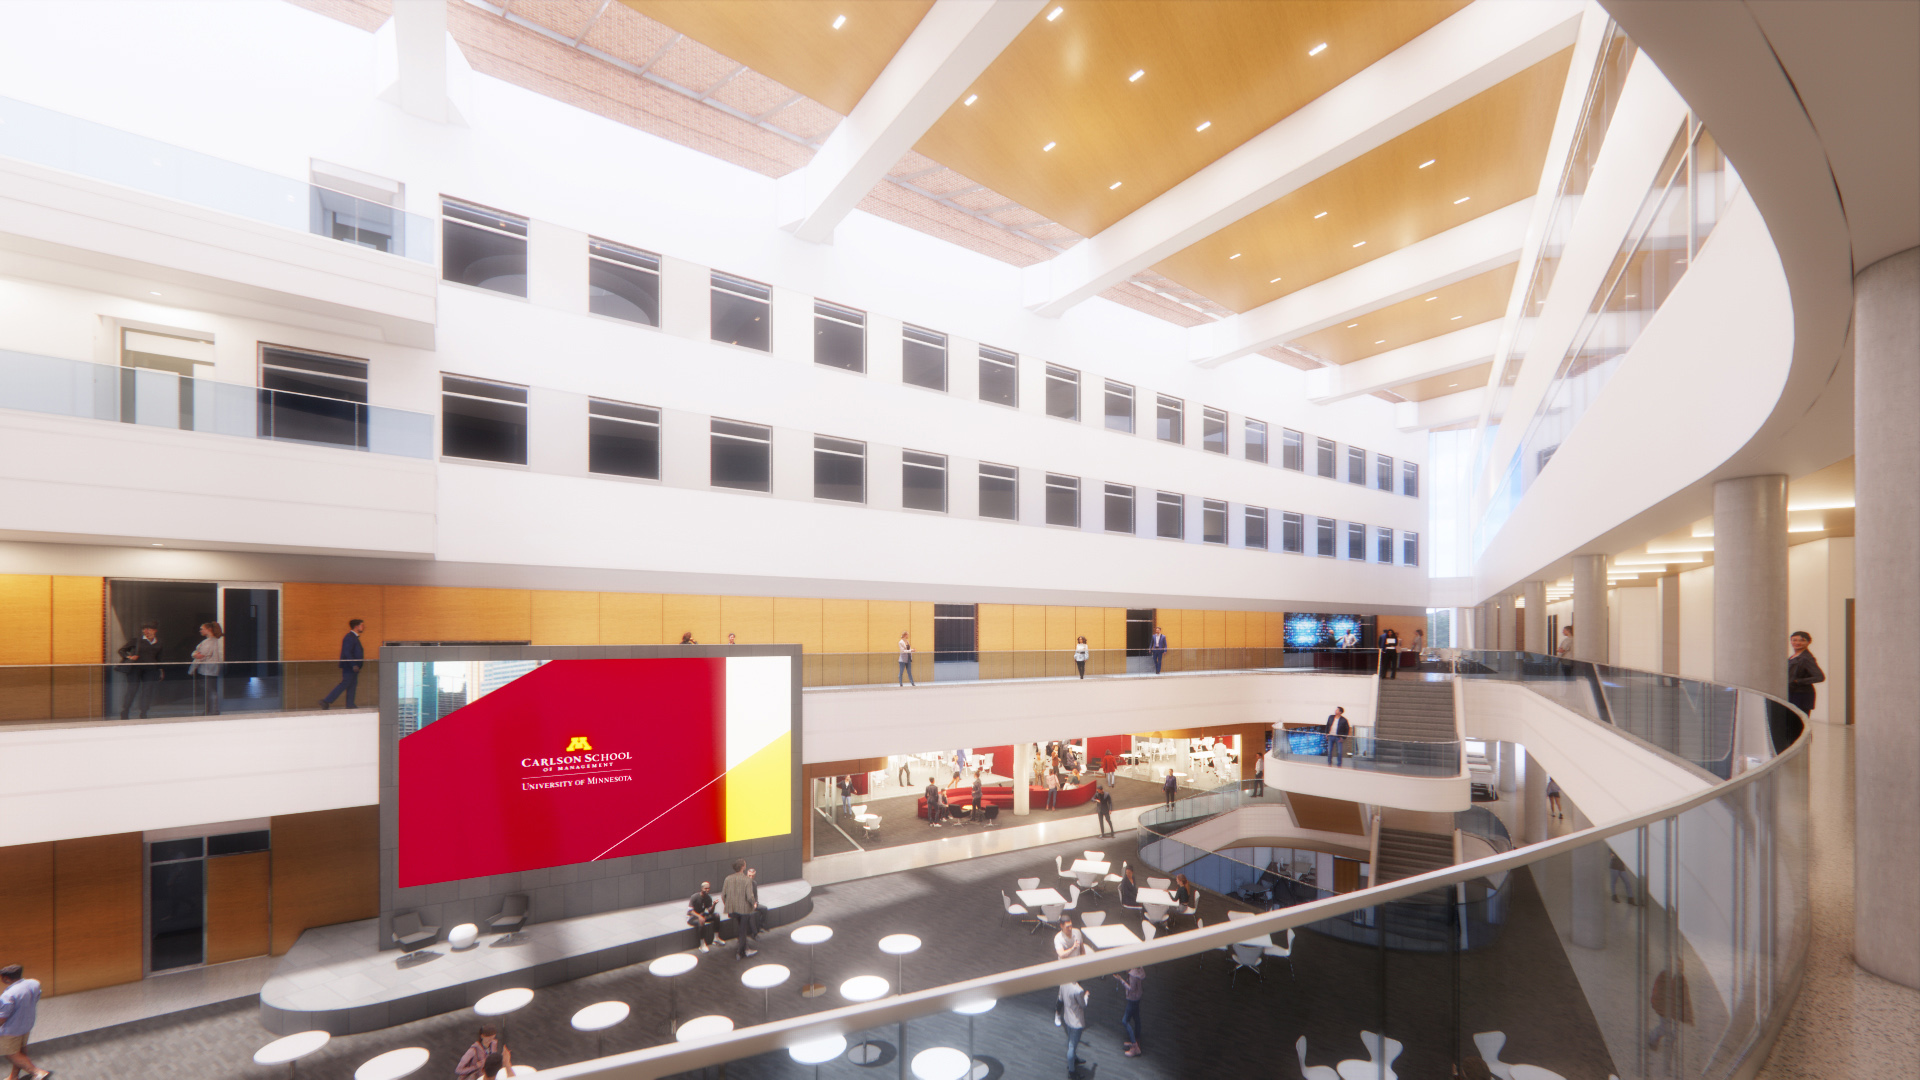 A rendering of the atrium renovation from the second floor.